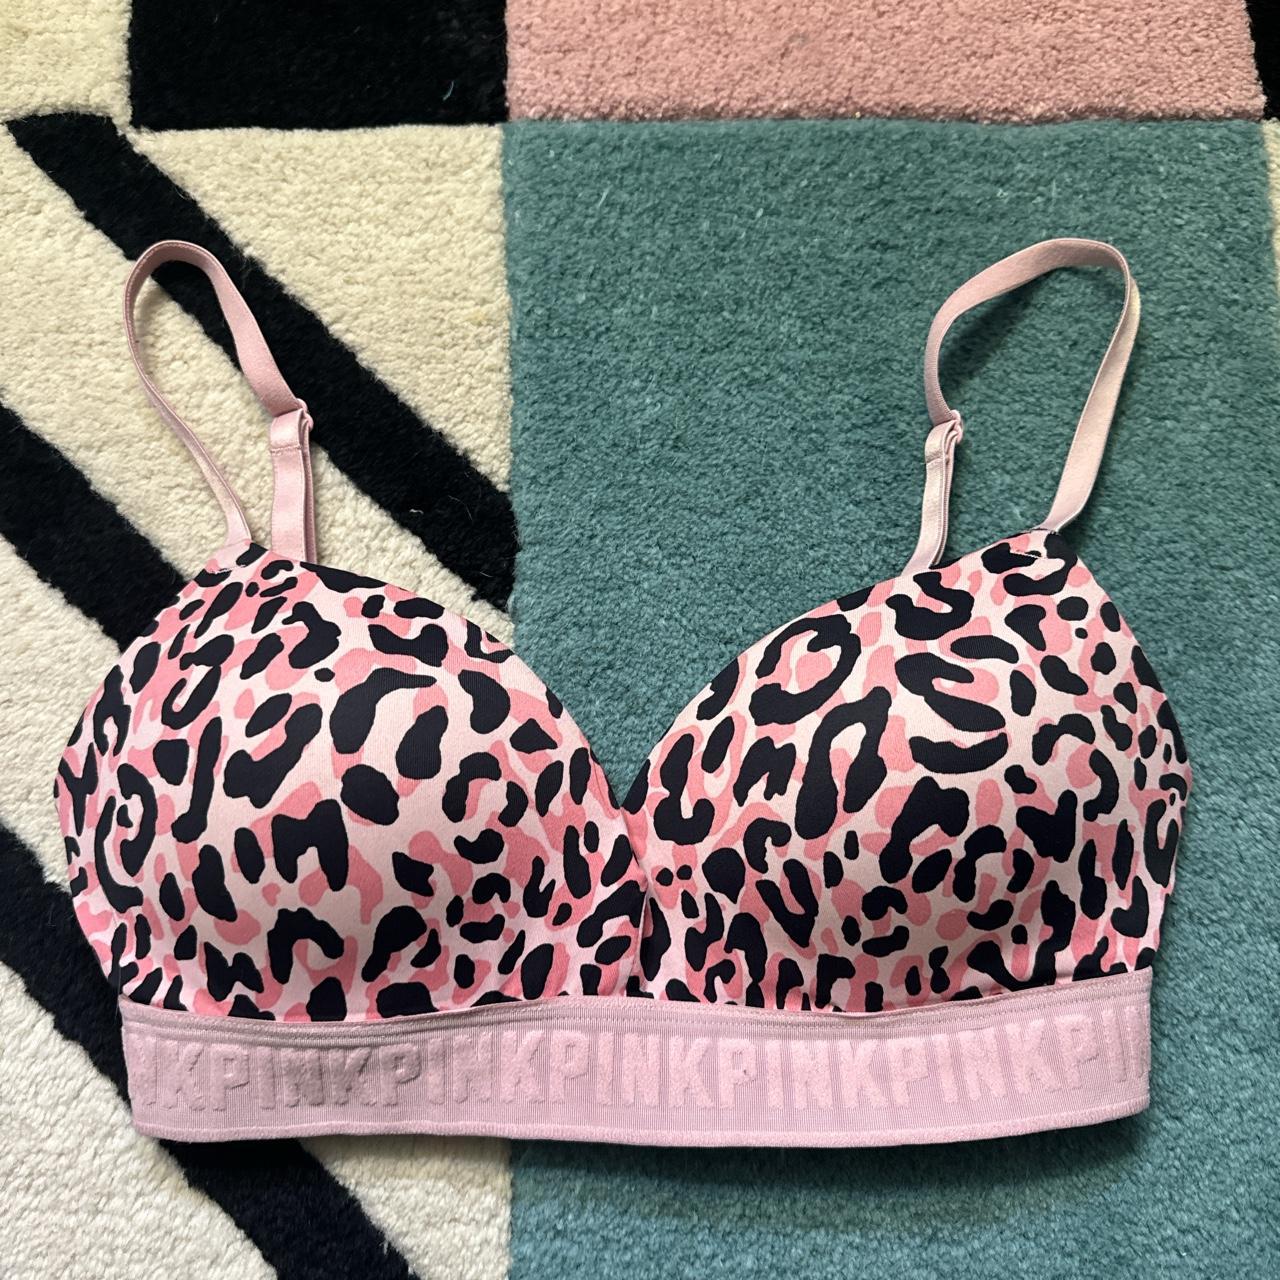 Victoria's Secret Pink Women's Wear Everywhere wire Less Push Up